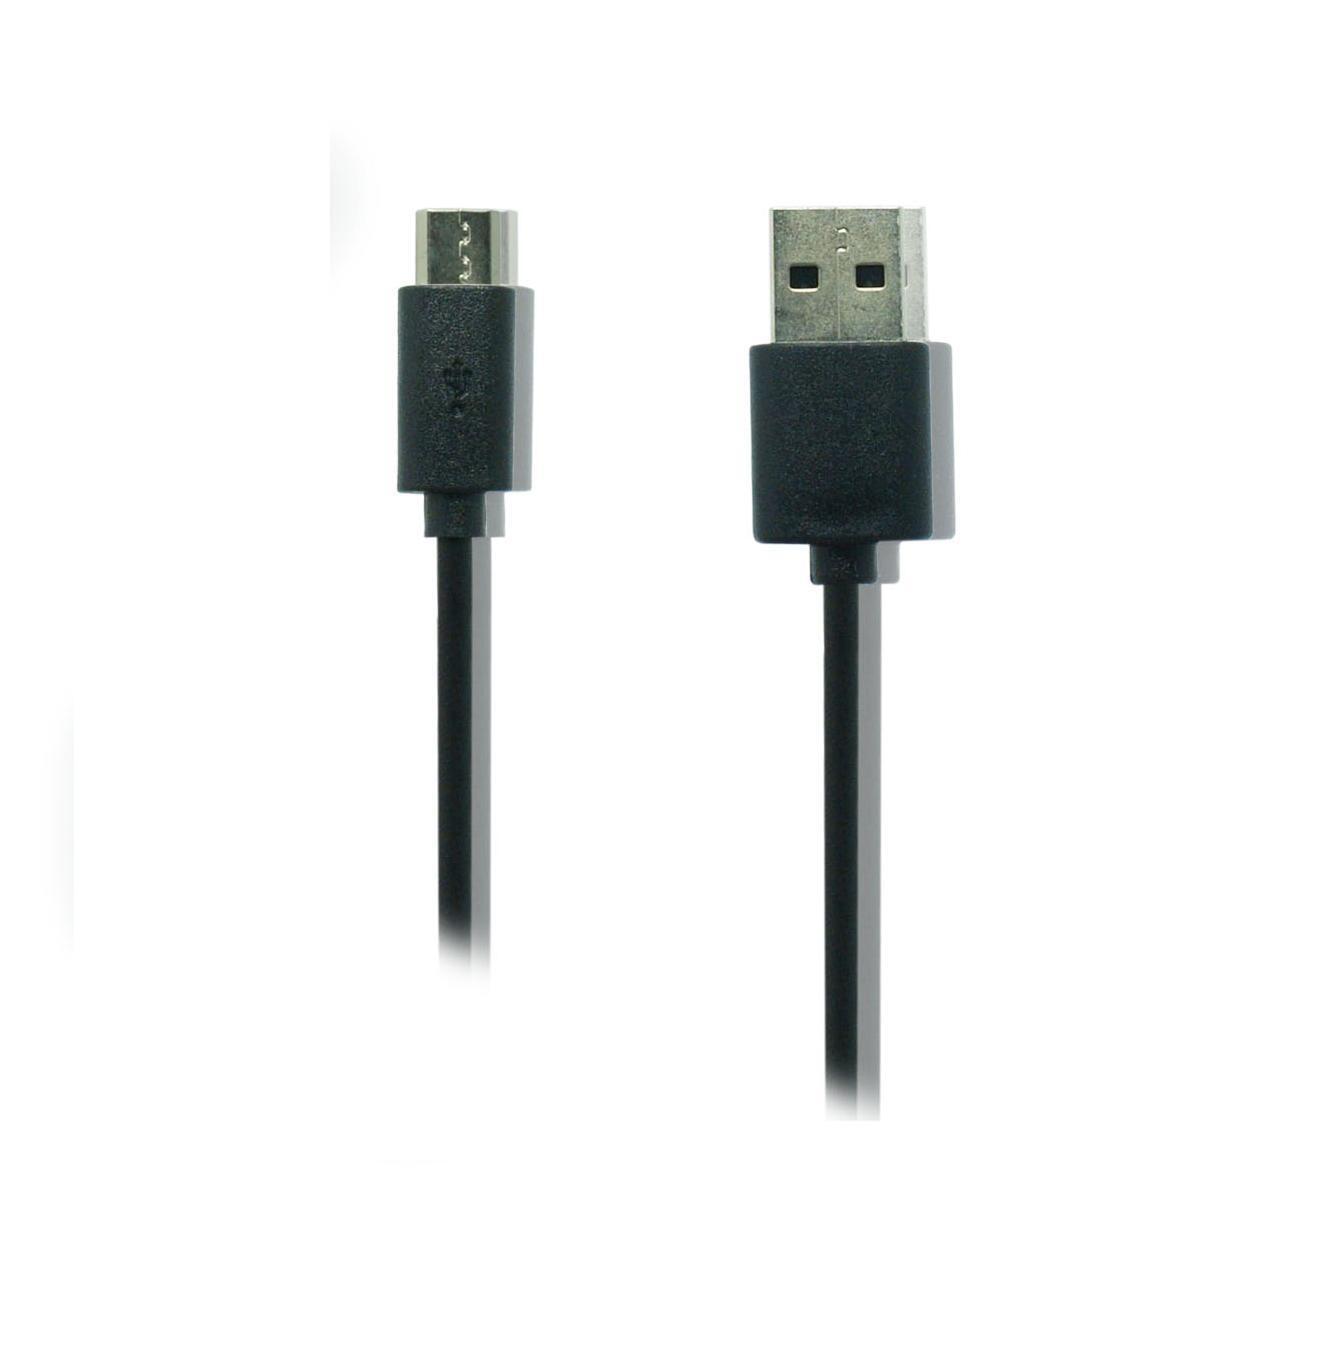 5Ft Usb Cord Cable For Us Cellular Tcl A30, Tracfone/Cricket/Att Tcl 30 Z 4188R - $14.99